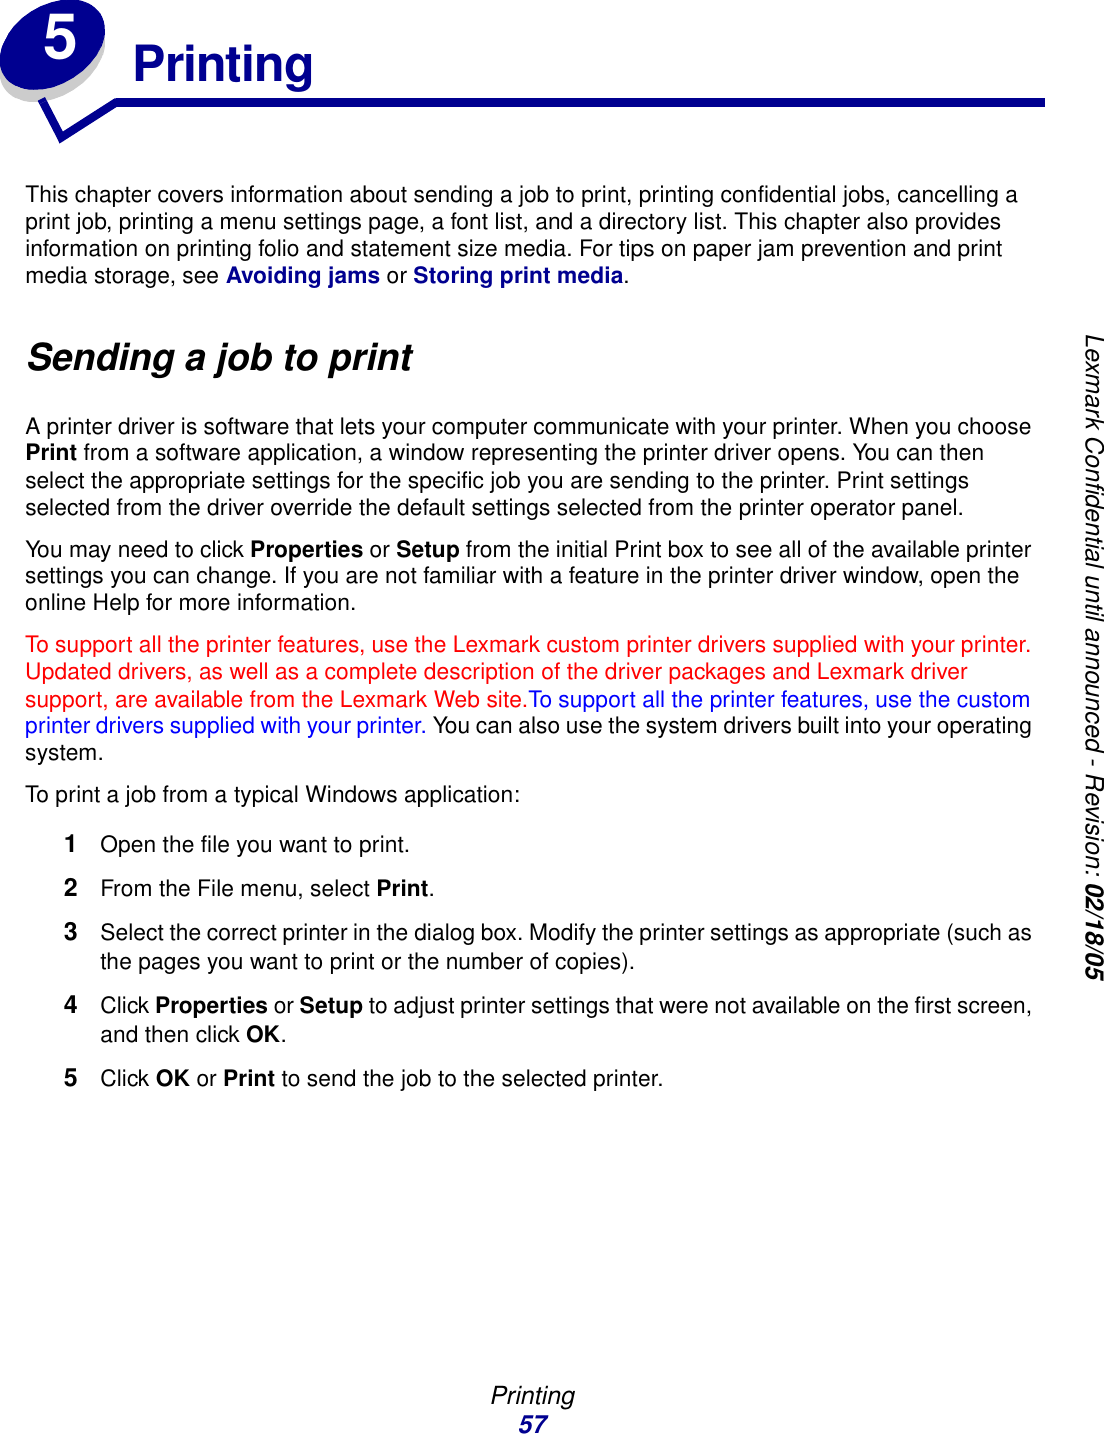 Printing57Lexmark Confidential until announced - Revision: 02/18/055PrintingThis chapter covers information about sending a job to print, printing confidential jobs, cancelling a print job, printing a menu settings page, a font list, and a directory list. This chapter also provides information on printing folio and statement size media. For tips on paper jam prevention and print media storage, see Avoiding jams or Storing print media.Sending a job to printA printer driver is software that lets your computer communicate with your printer. When you choose Print from a software application, a window representing the printer driver opens. You can then select the appropriate settings for the specific job you are sending to the printer. Print settings selected from the driver override the default settings selected from the printer operator panel.You may need to click Properties or Setup from the initial Print box to see all of the available printer settings you can change. If you are not familiar with a feature in the printer driver window, open the online Help for more information.To support all the printer features, use the Lexmark custom printer drivers supplied with your printer. Updated drivers, as well as a complete description of the driver packages and Lexmark driver support, are available from the Lexmark Web site.To support all the printer features, use the custom printer drivers supplied with your printer. You can also use the system drivers built into your operating system.To print a job from a typical Windows application:1Open the file you want to print.2From the File menu, select Print.3Select the correct printer in the dialog box. Modify the printer settings as appropriate (such as the pages you want to print or the number of copies).4Click Properties or Setup to adjust printer settings that were not available on the first screen, and then click OK.5Click OK or Print to send the job to the selected printer.